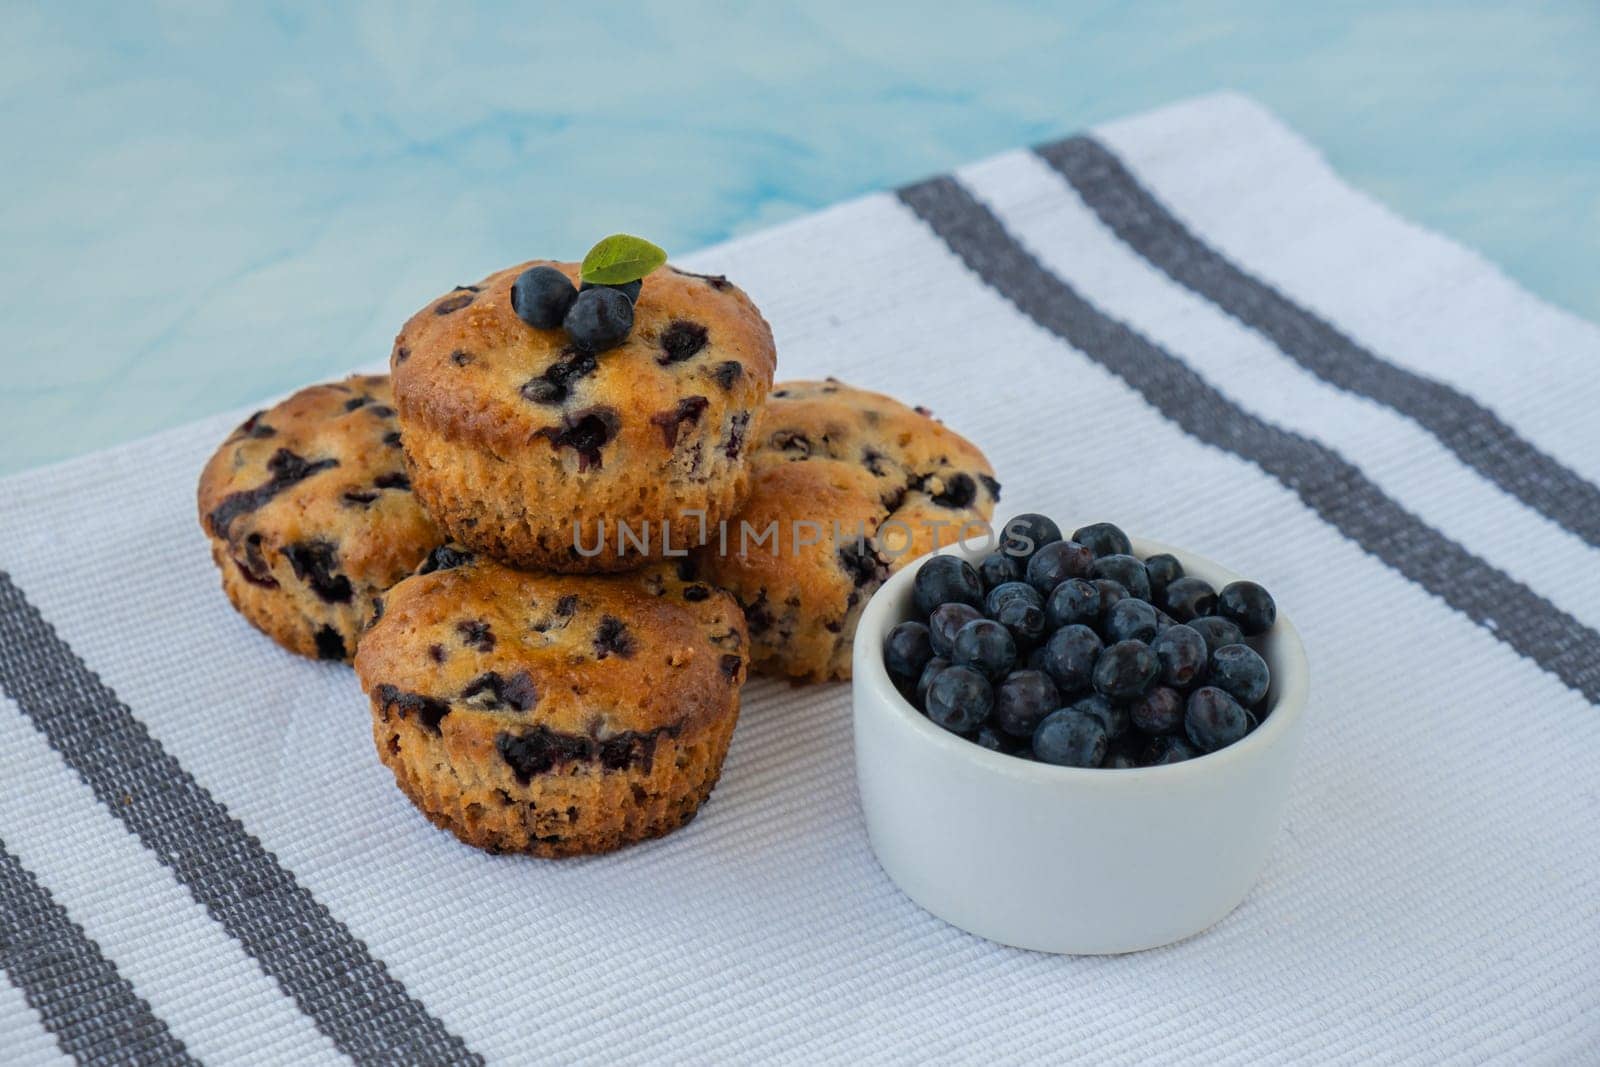 Homemade baked blueberry muffins with fresh blackberries. Tasty pastry sweet cupcake dessert. Berry pie cupcakes with organic berries. Gluten free healthcare recipe from alternative flour by anna_stasiia